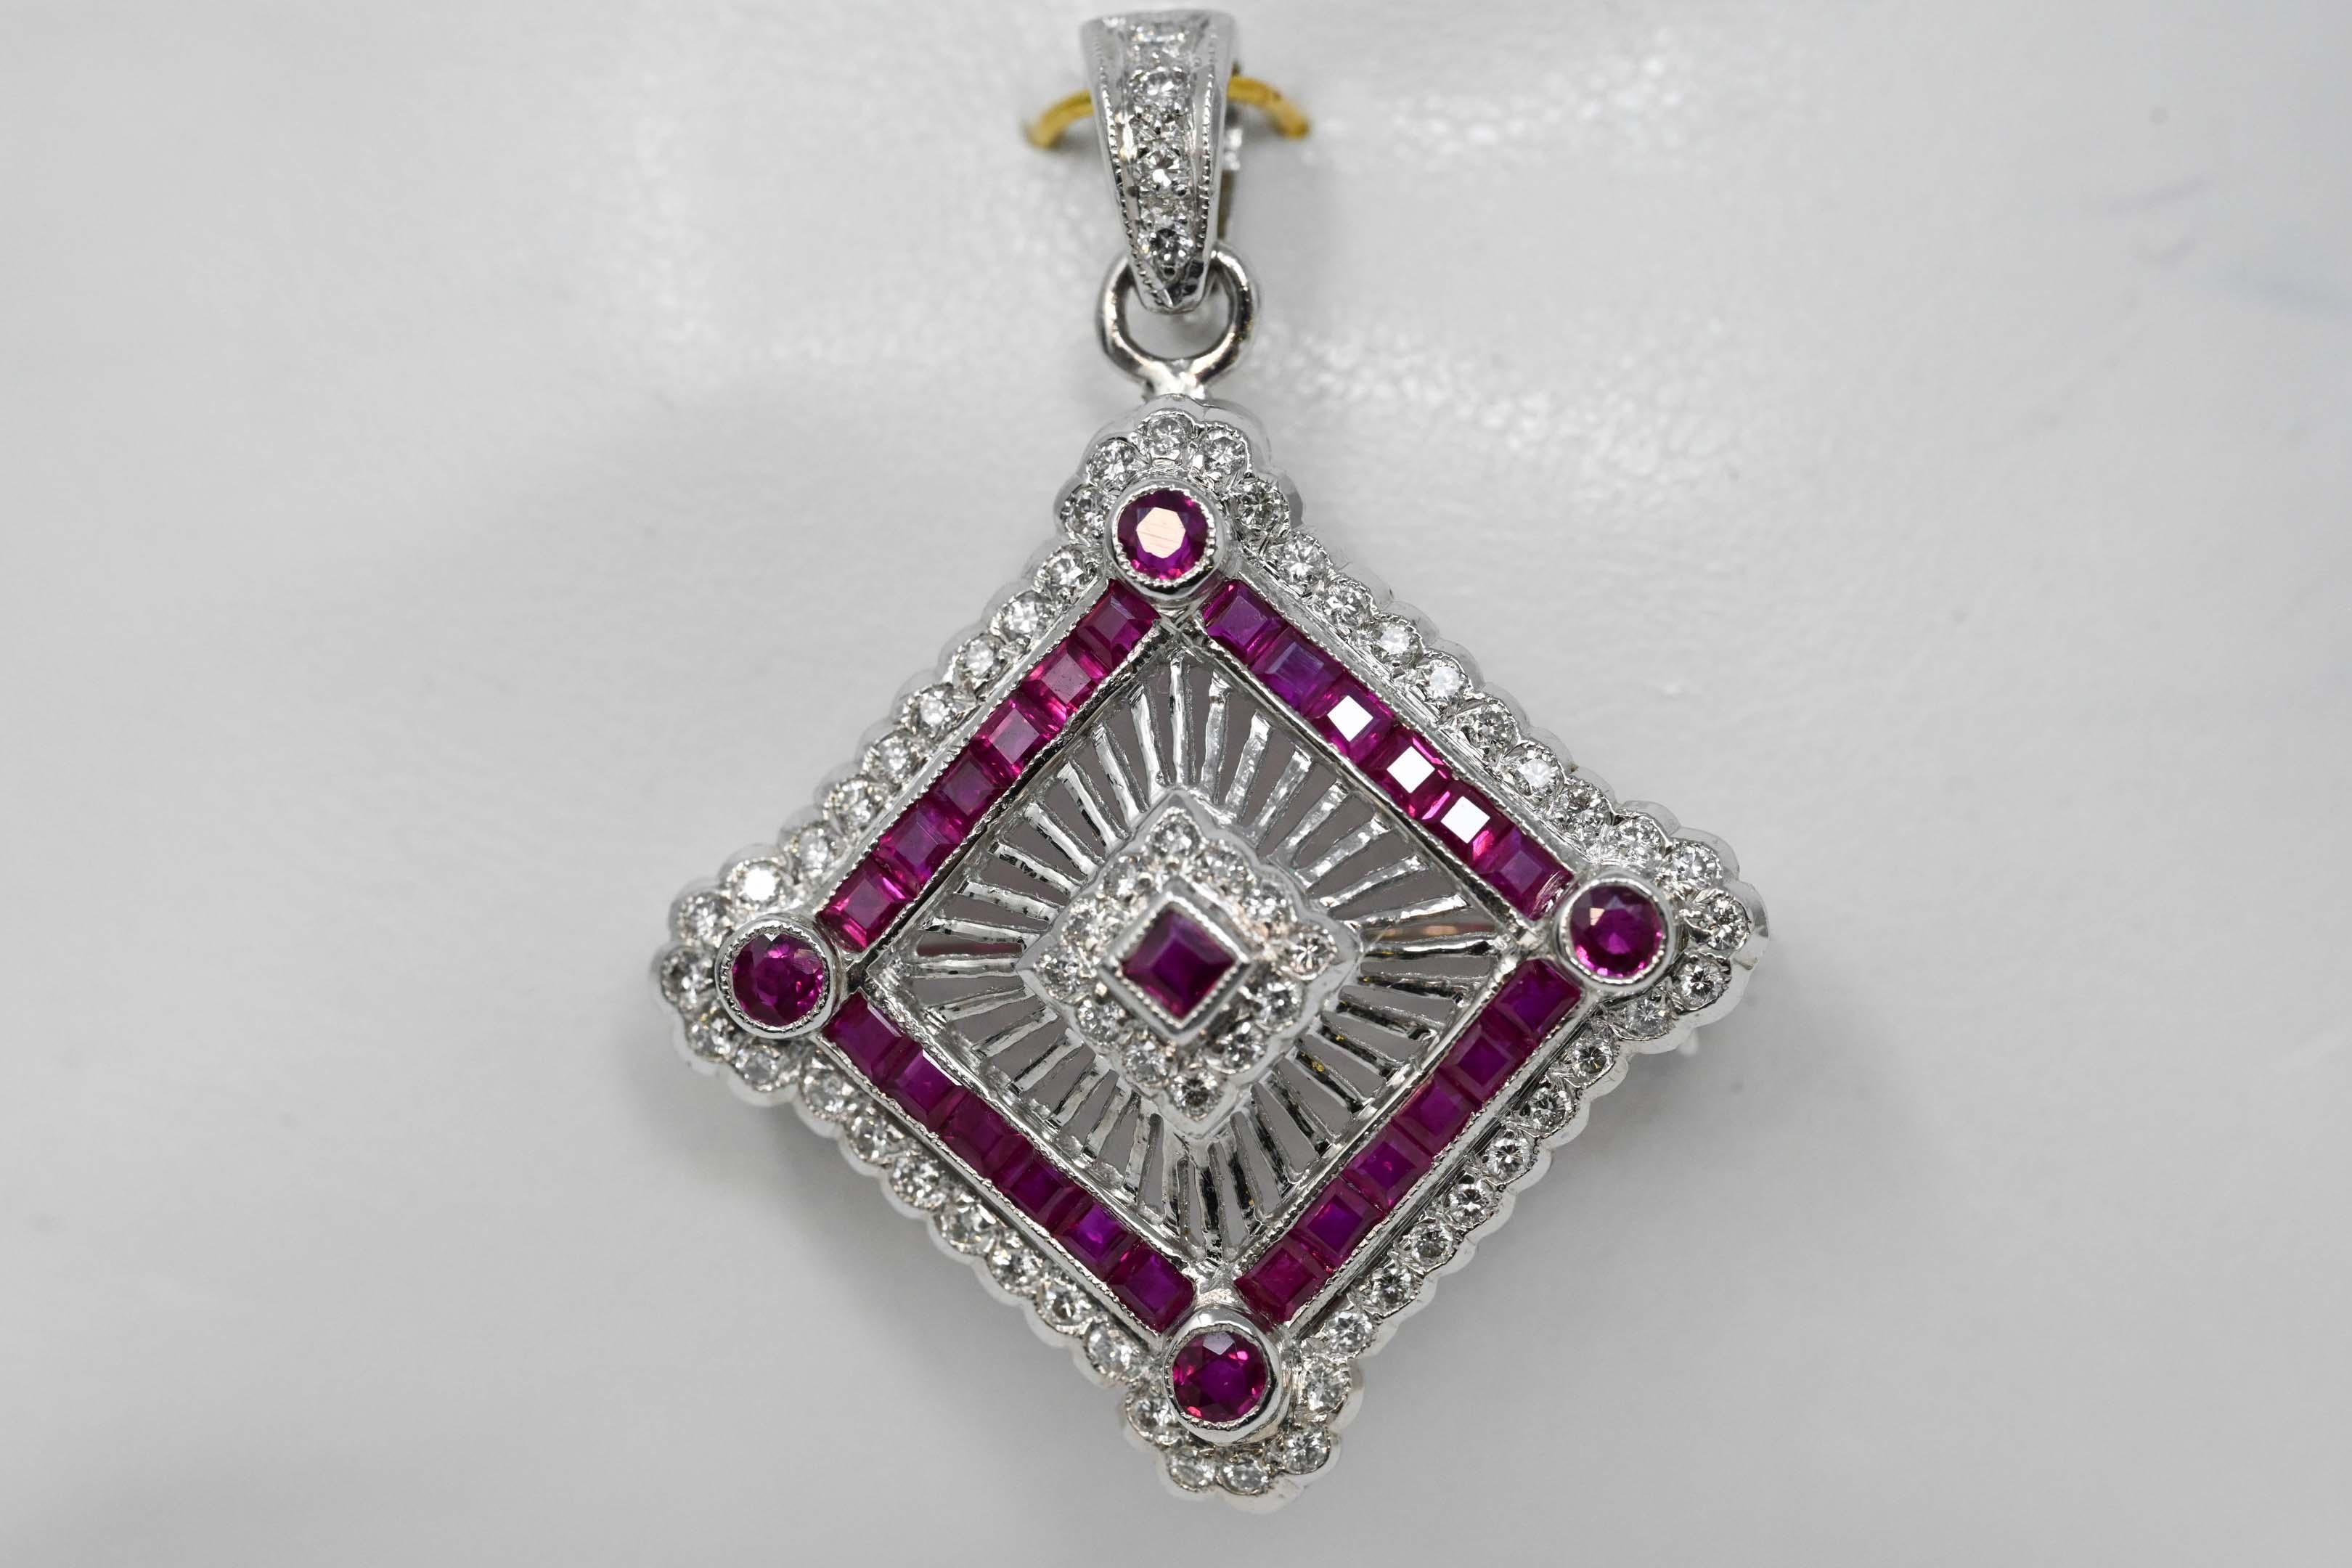 18k white gold pendant set with 64 diamonds full cut VS-GH for a total weight of .65ct, 24 square rubies and 4 round cut. Pendant measures 29mm x 29mm without a loupe. Stamped 750, maker unknown weighs 7.7 grams.
